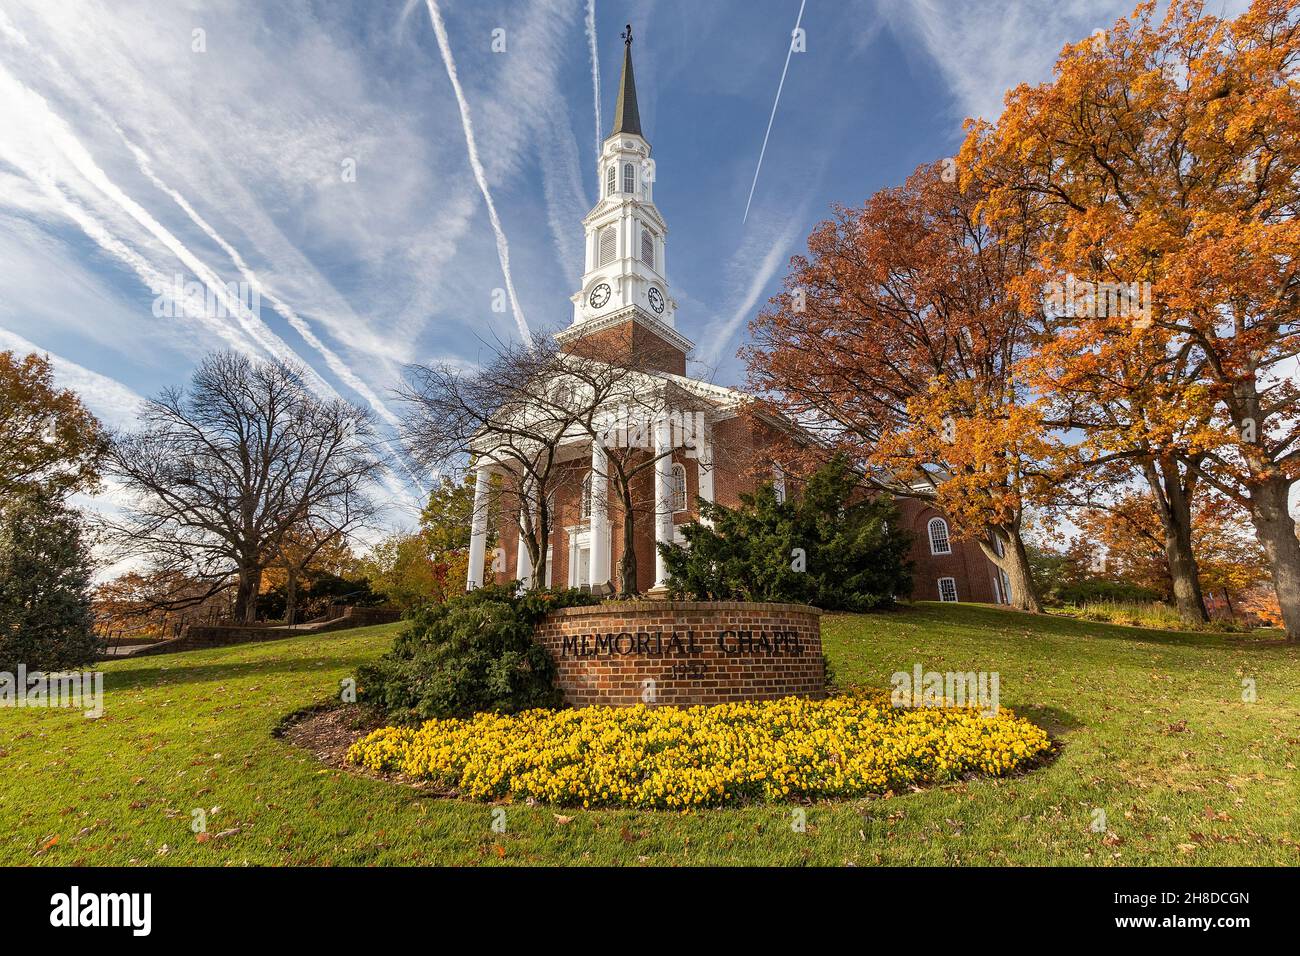 COLLEGE PARK, MD, USA - NOVEMBER 20: Memorial Chapel on November 20, 2021 at the University of Maryland in College Park, Maryland. Stock Photo